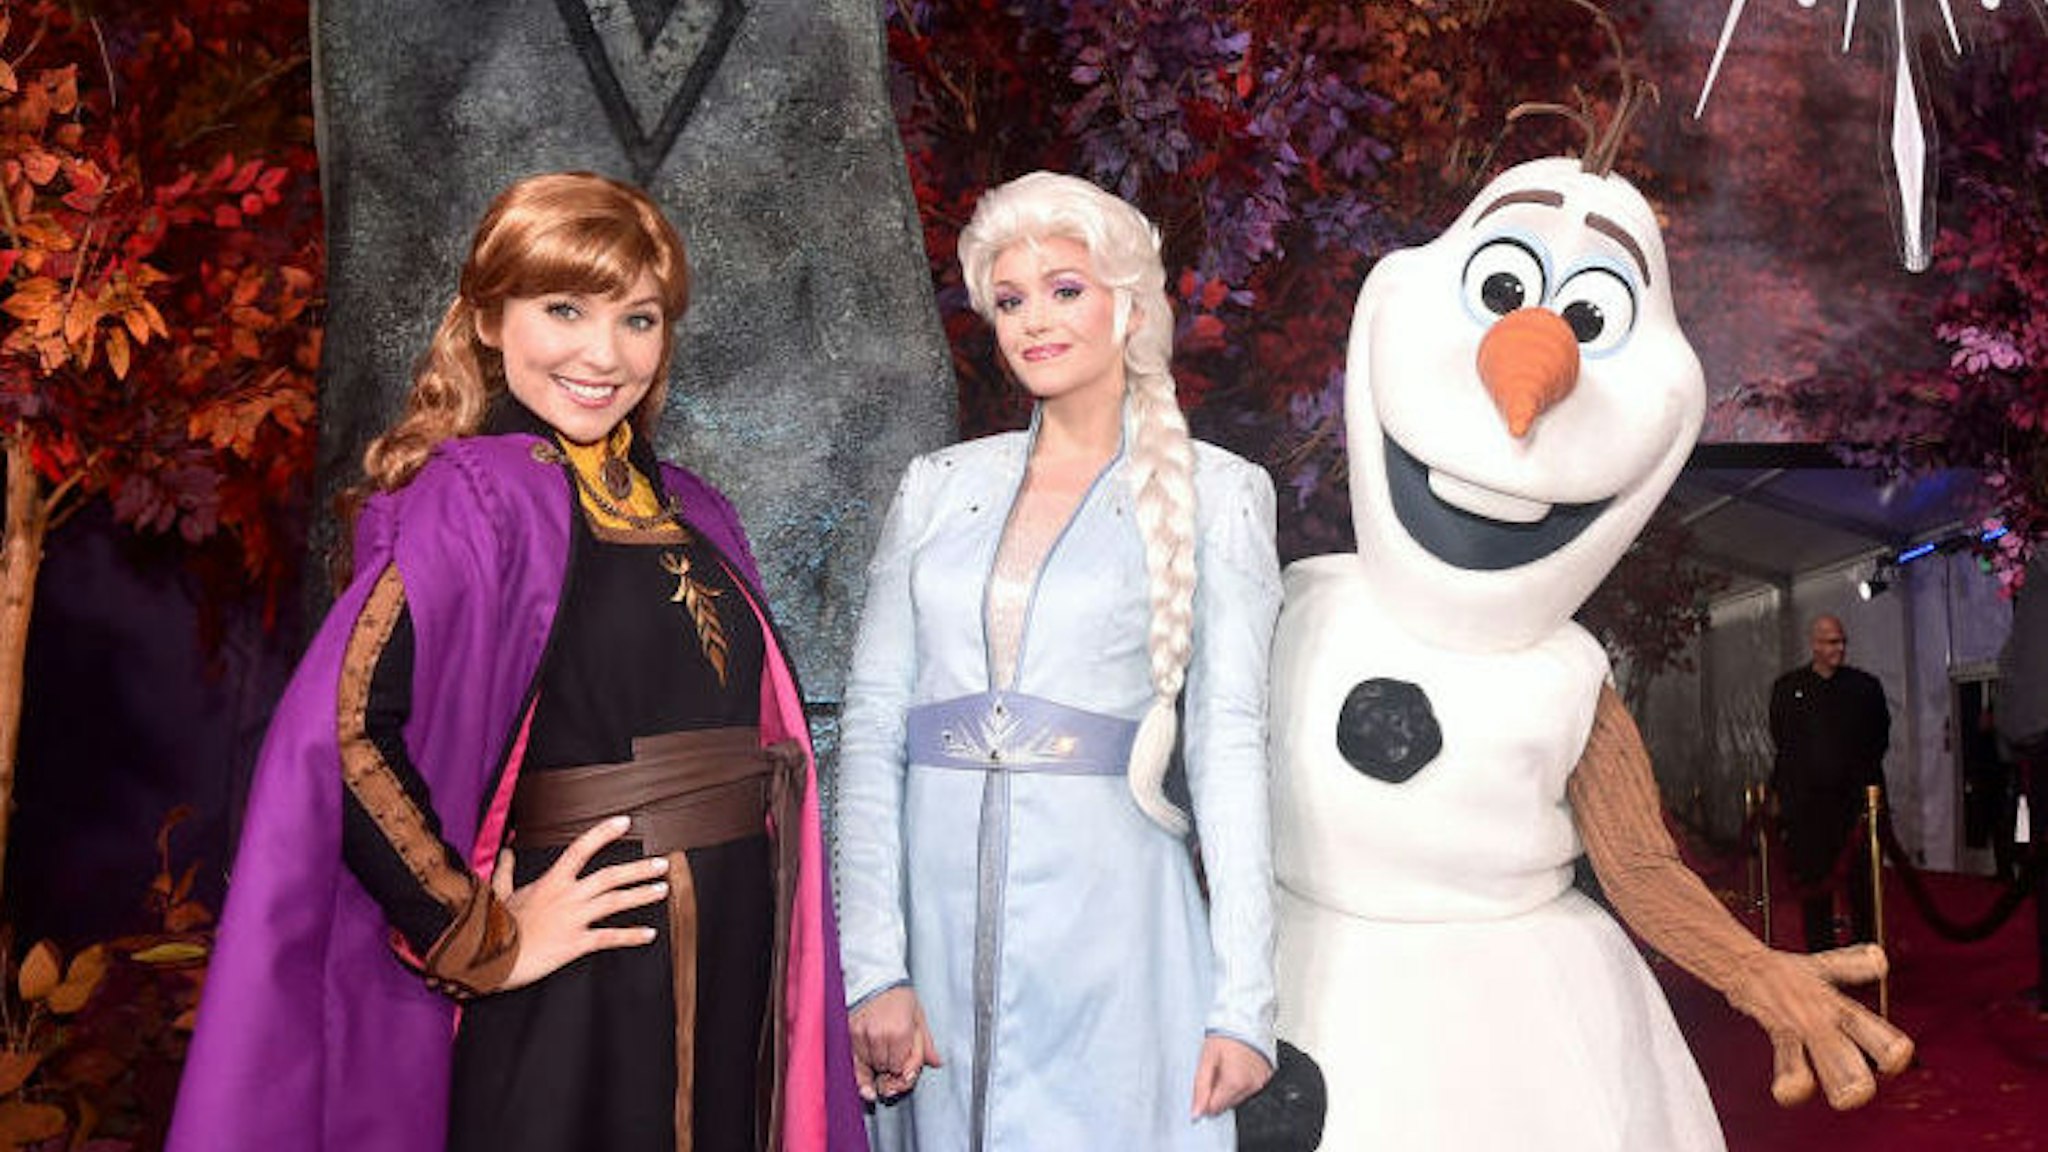 (L-R) Anna, Elsa, and Olaf attend the world premiere of Disney's "Frozen 2" at Hollywood's Dolby Theatre on Thursday, November 7, 2019 in Hollywood, California. (Photo by Alberto E. Rodriguez/Getty Images for Disney)